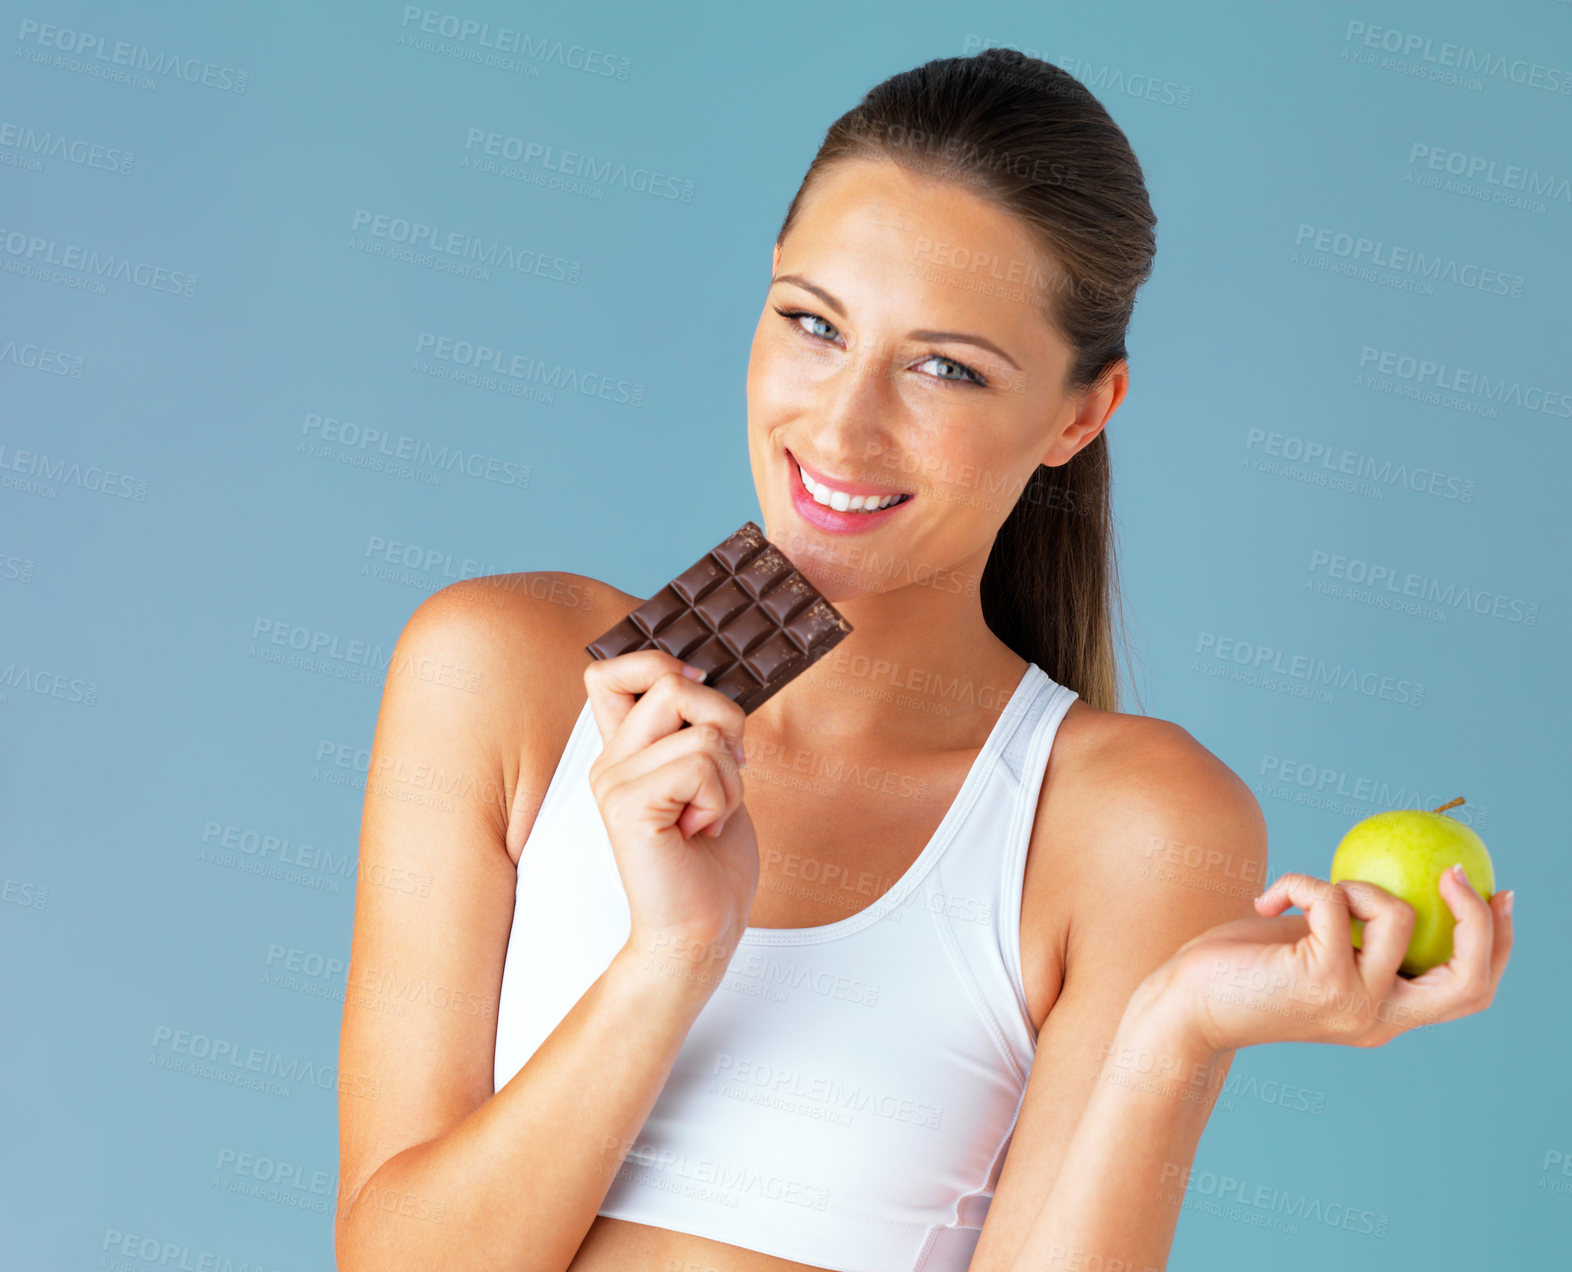 Buy stock photo Studio shot of a fit young woman holding an apple and a chocolate against a blue background